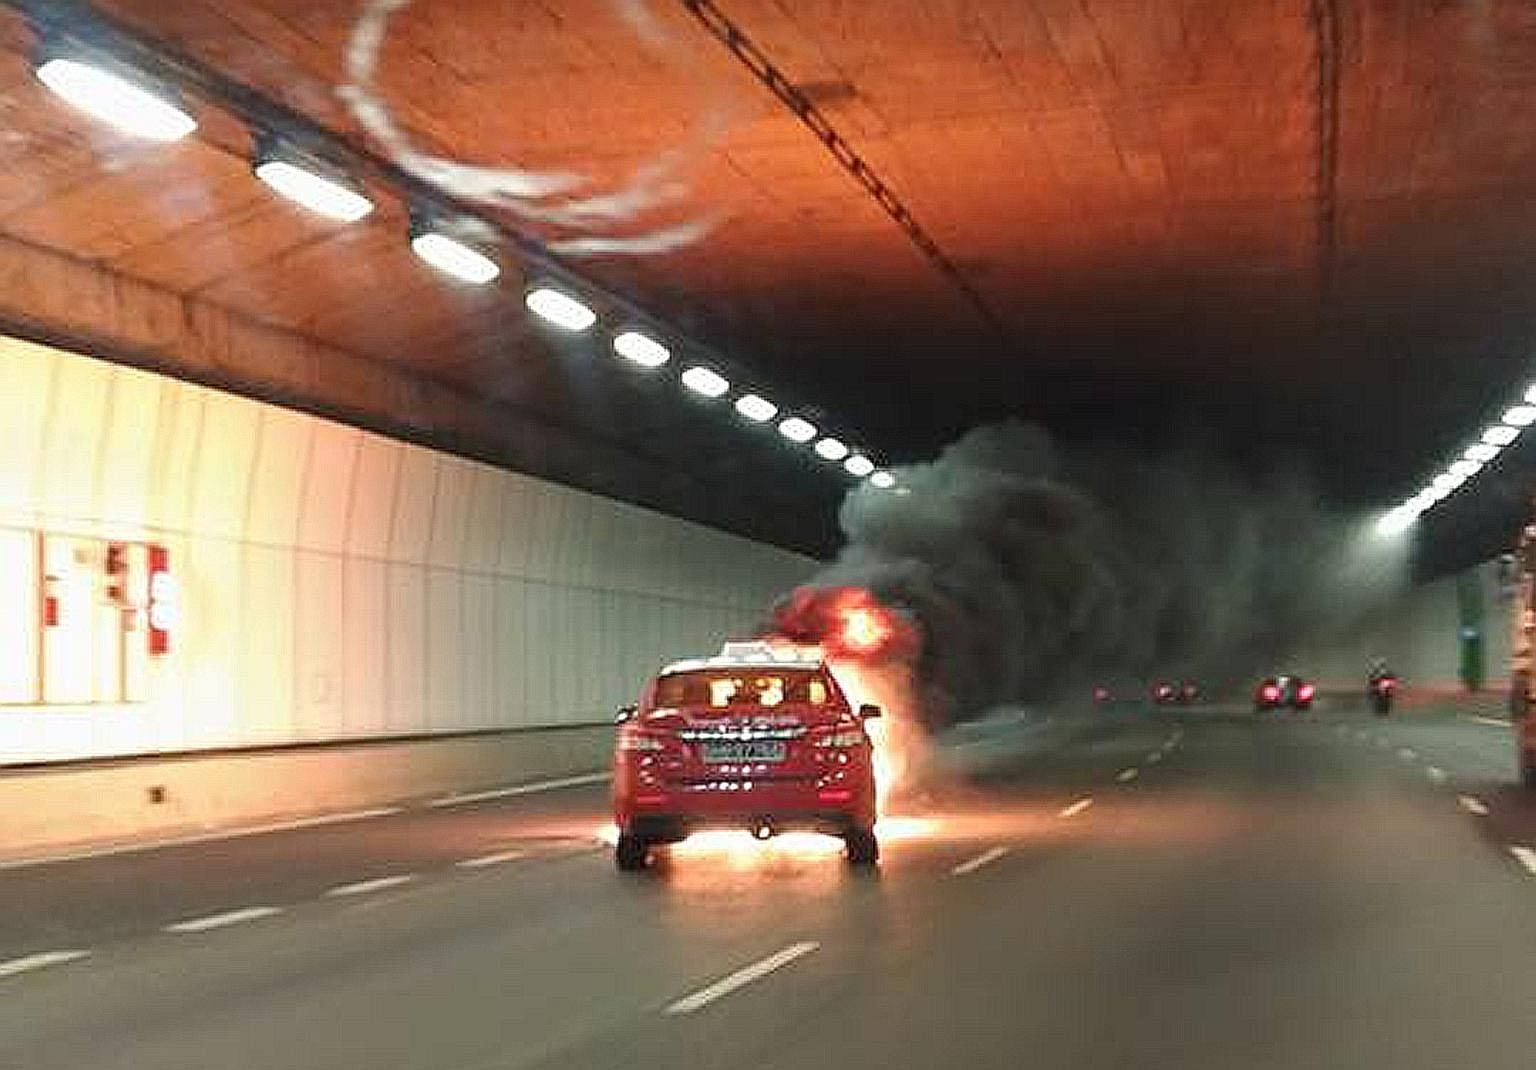 A taxi caught fire in the KPE tunnel in August, triggering an evacuation. A new water-mist fire-fighting system will be installed by 2022.